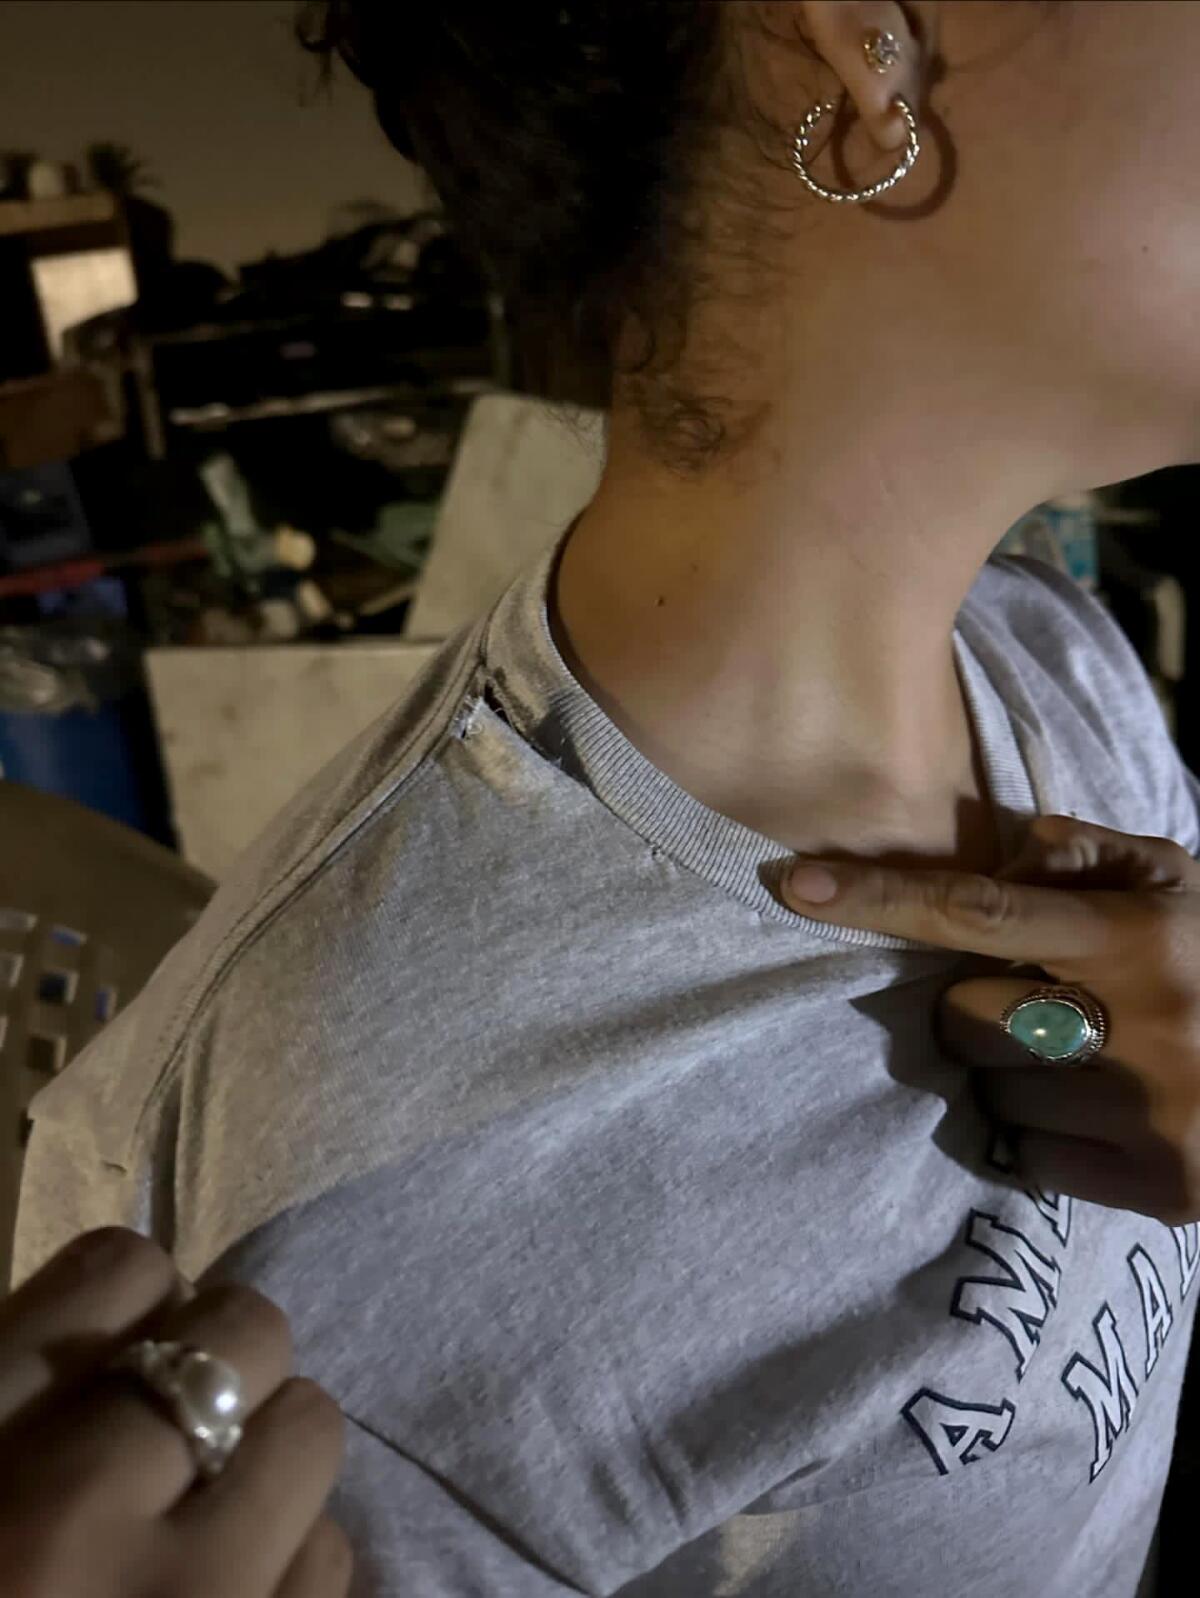 A woman shows the right side of her neck.